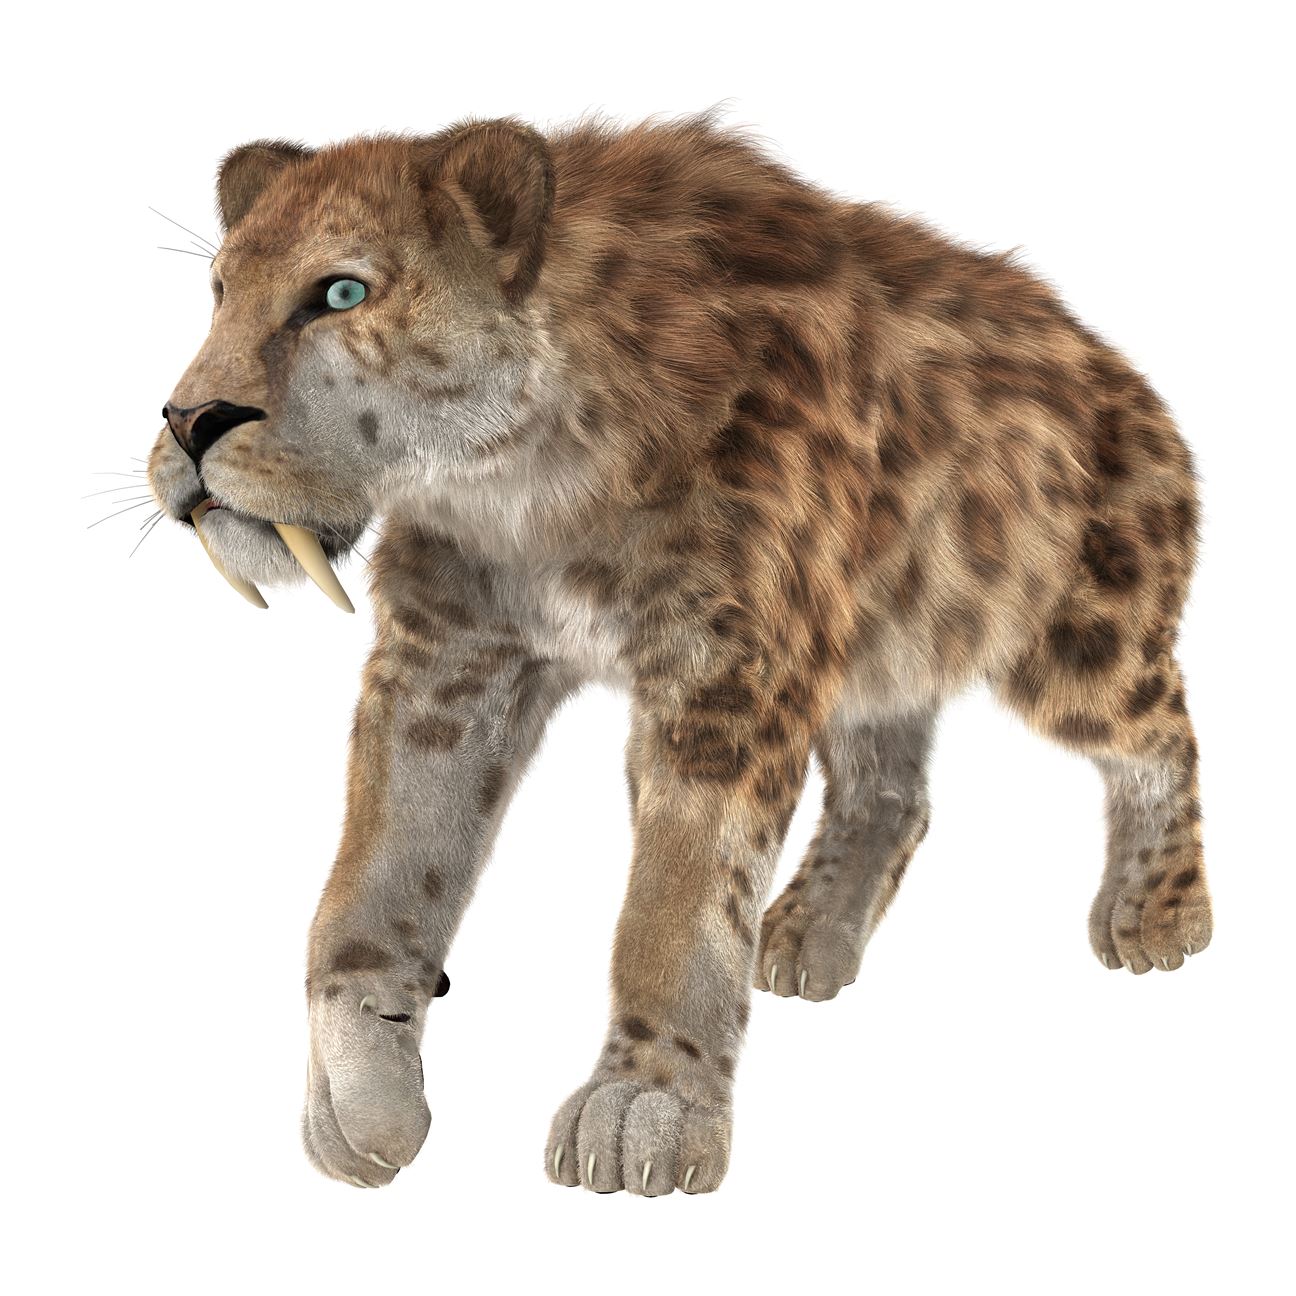 A picture of the sabre-toothed feline which today's tiger's descend from. The feline has sharp, pointy, protruding canines.